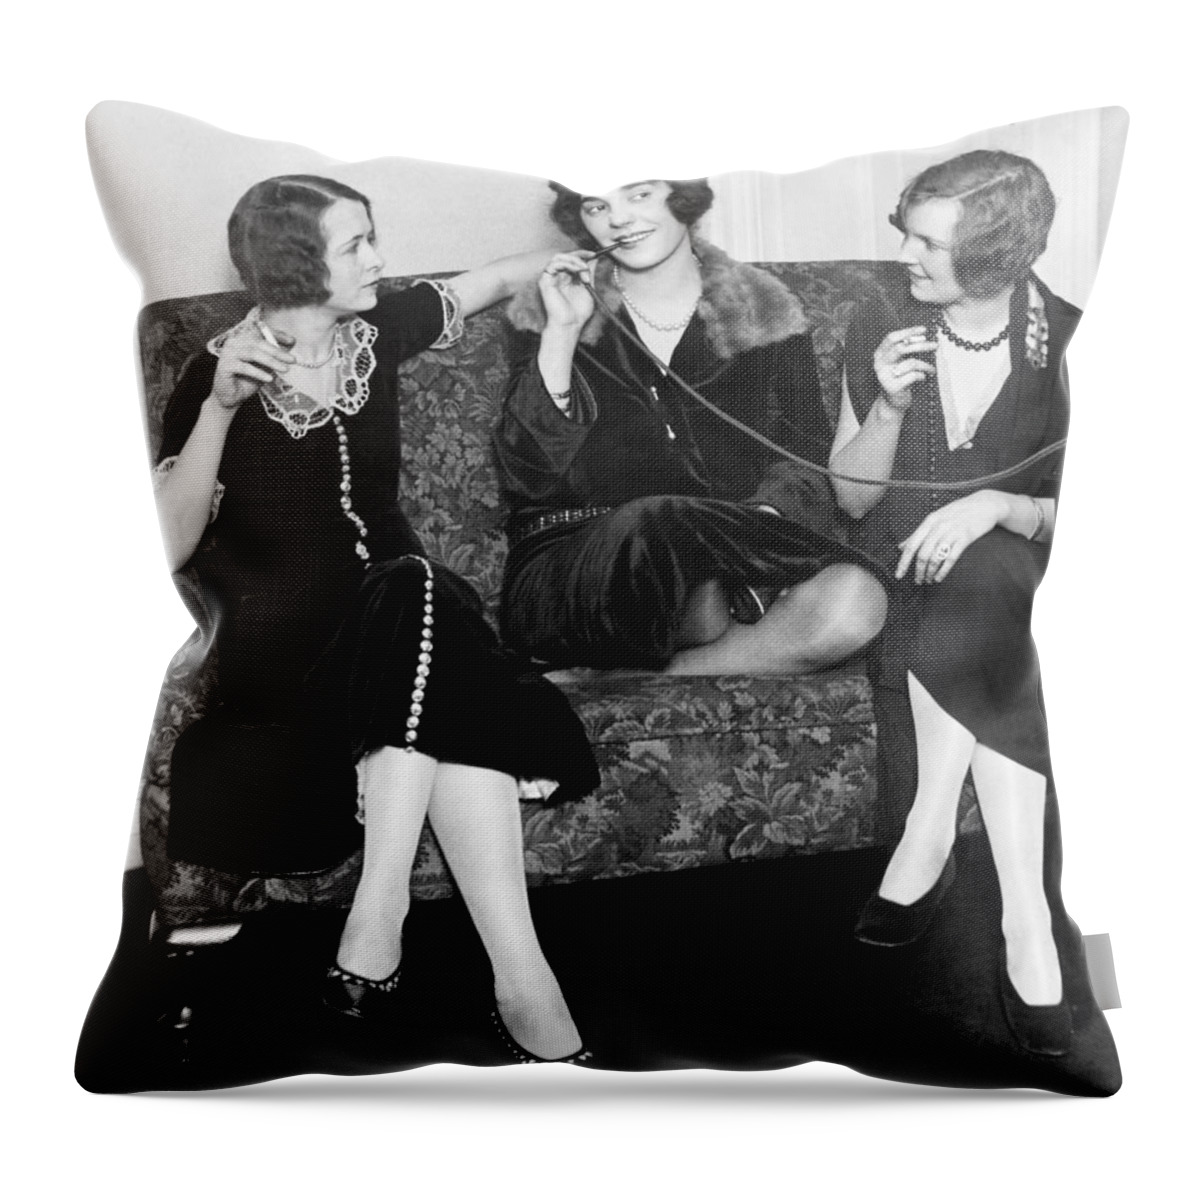 1924 Throw Pillow featuring the photograph Cigarette Smoking, 1924 by Granger